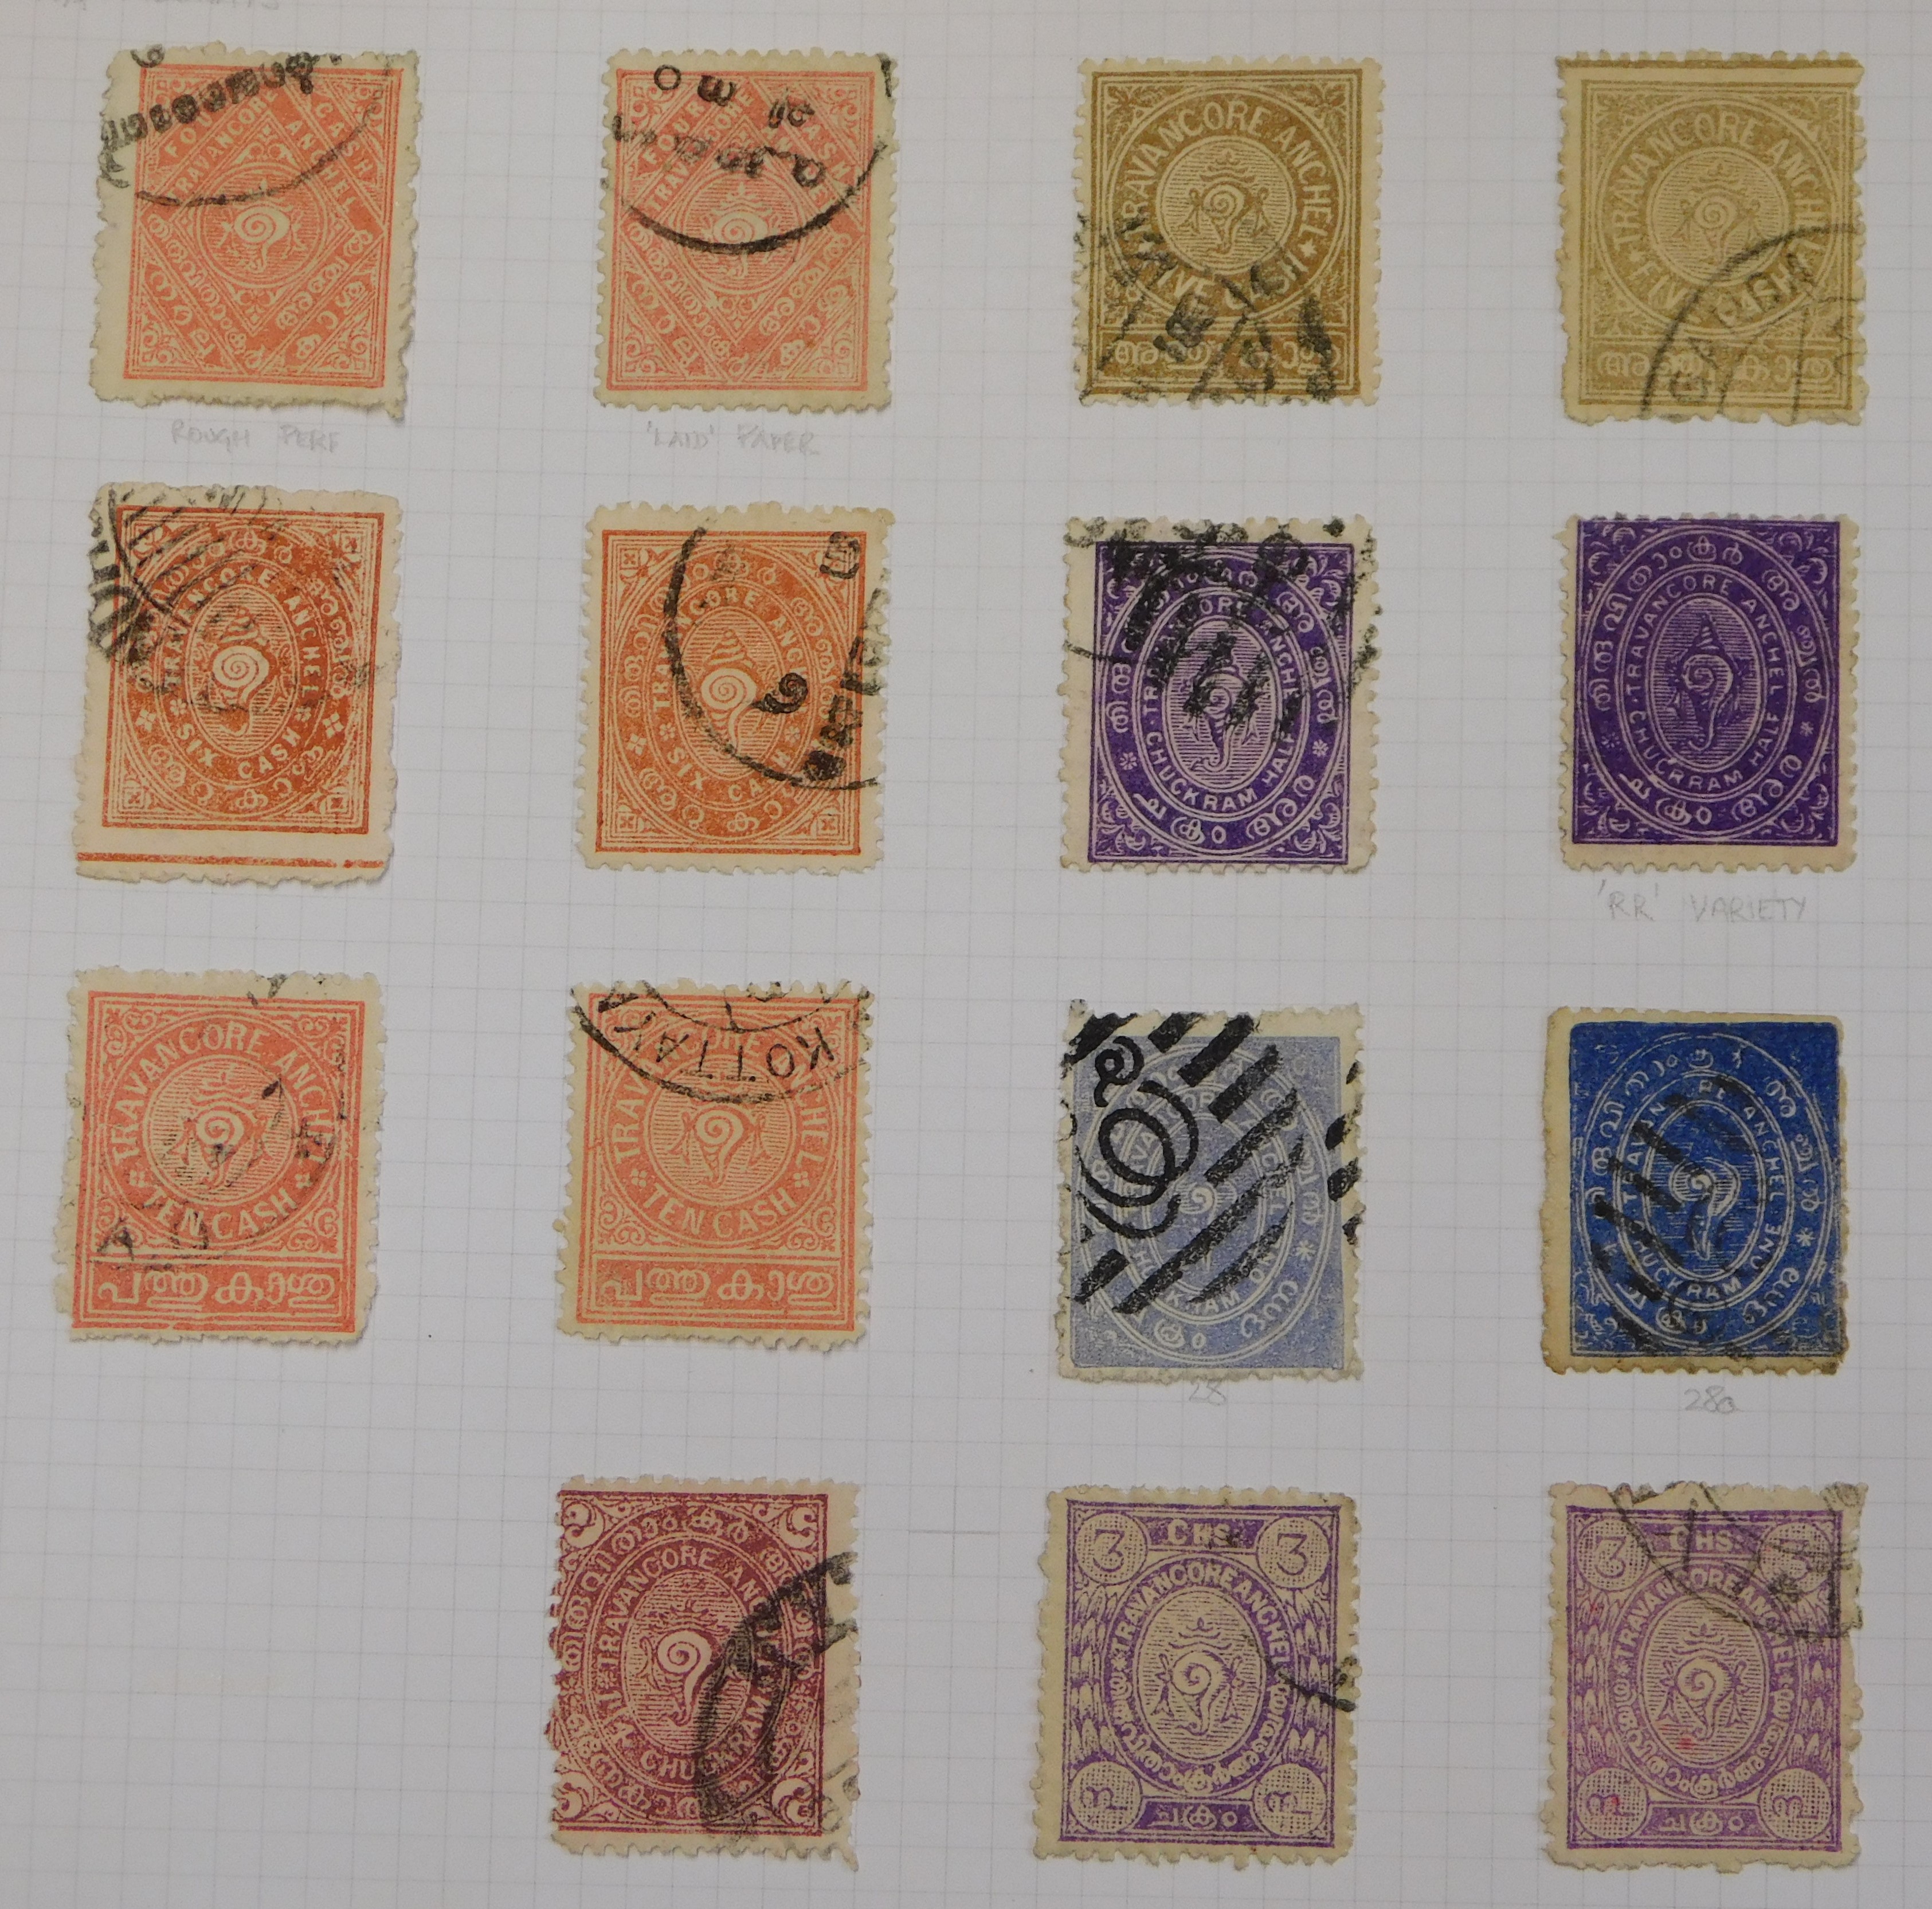 India (Travancore) 1914-1922 wmk sideways SG 23-30 Fine used with varieties (17) and 1921 Surcharges - Image 4 of 5